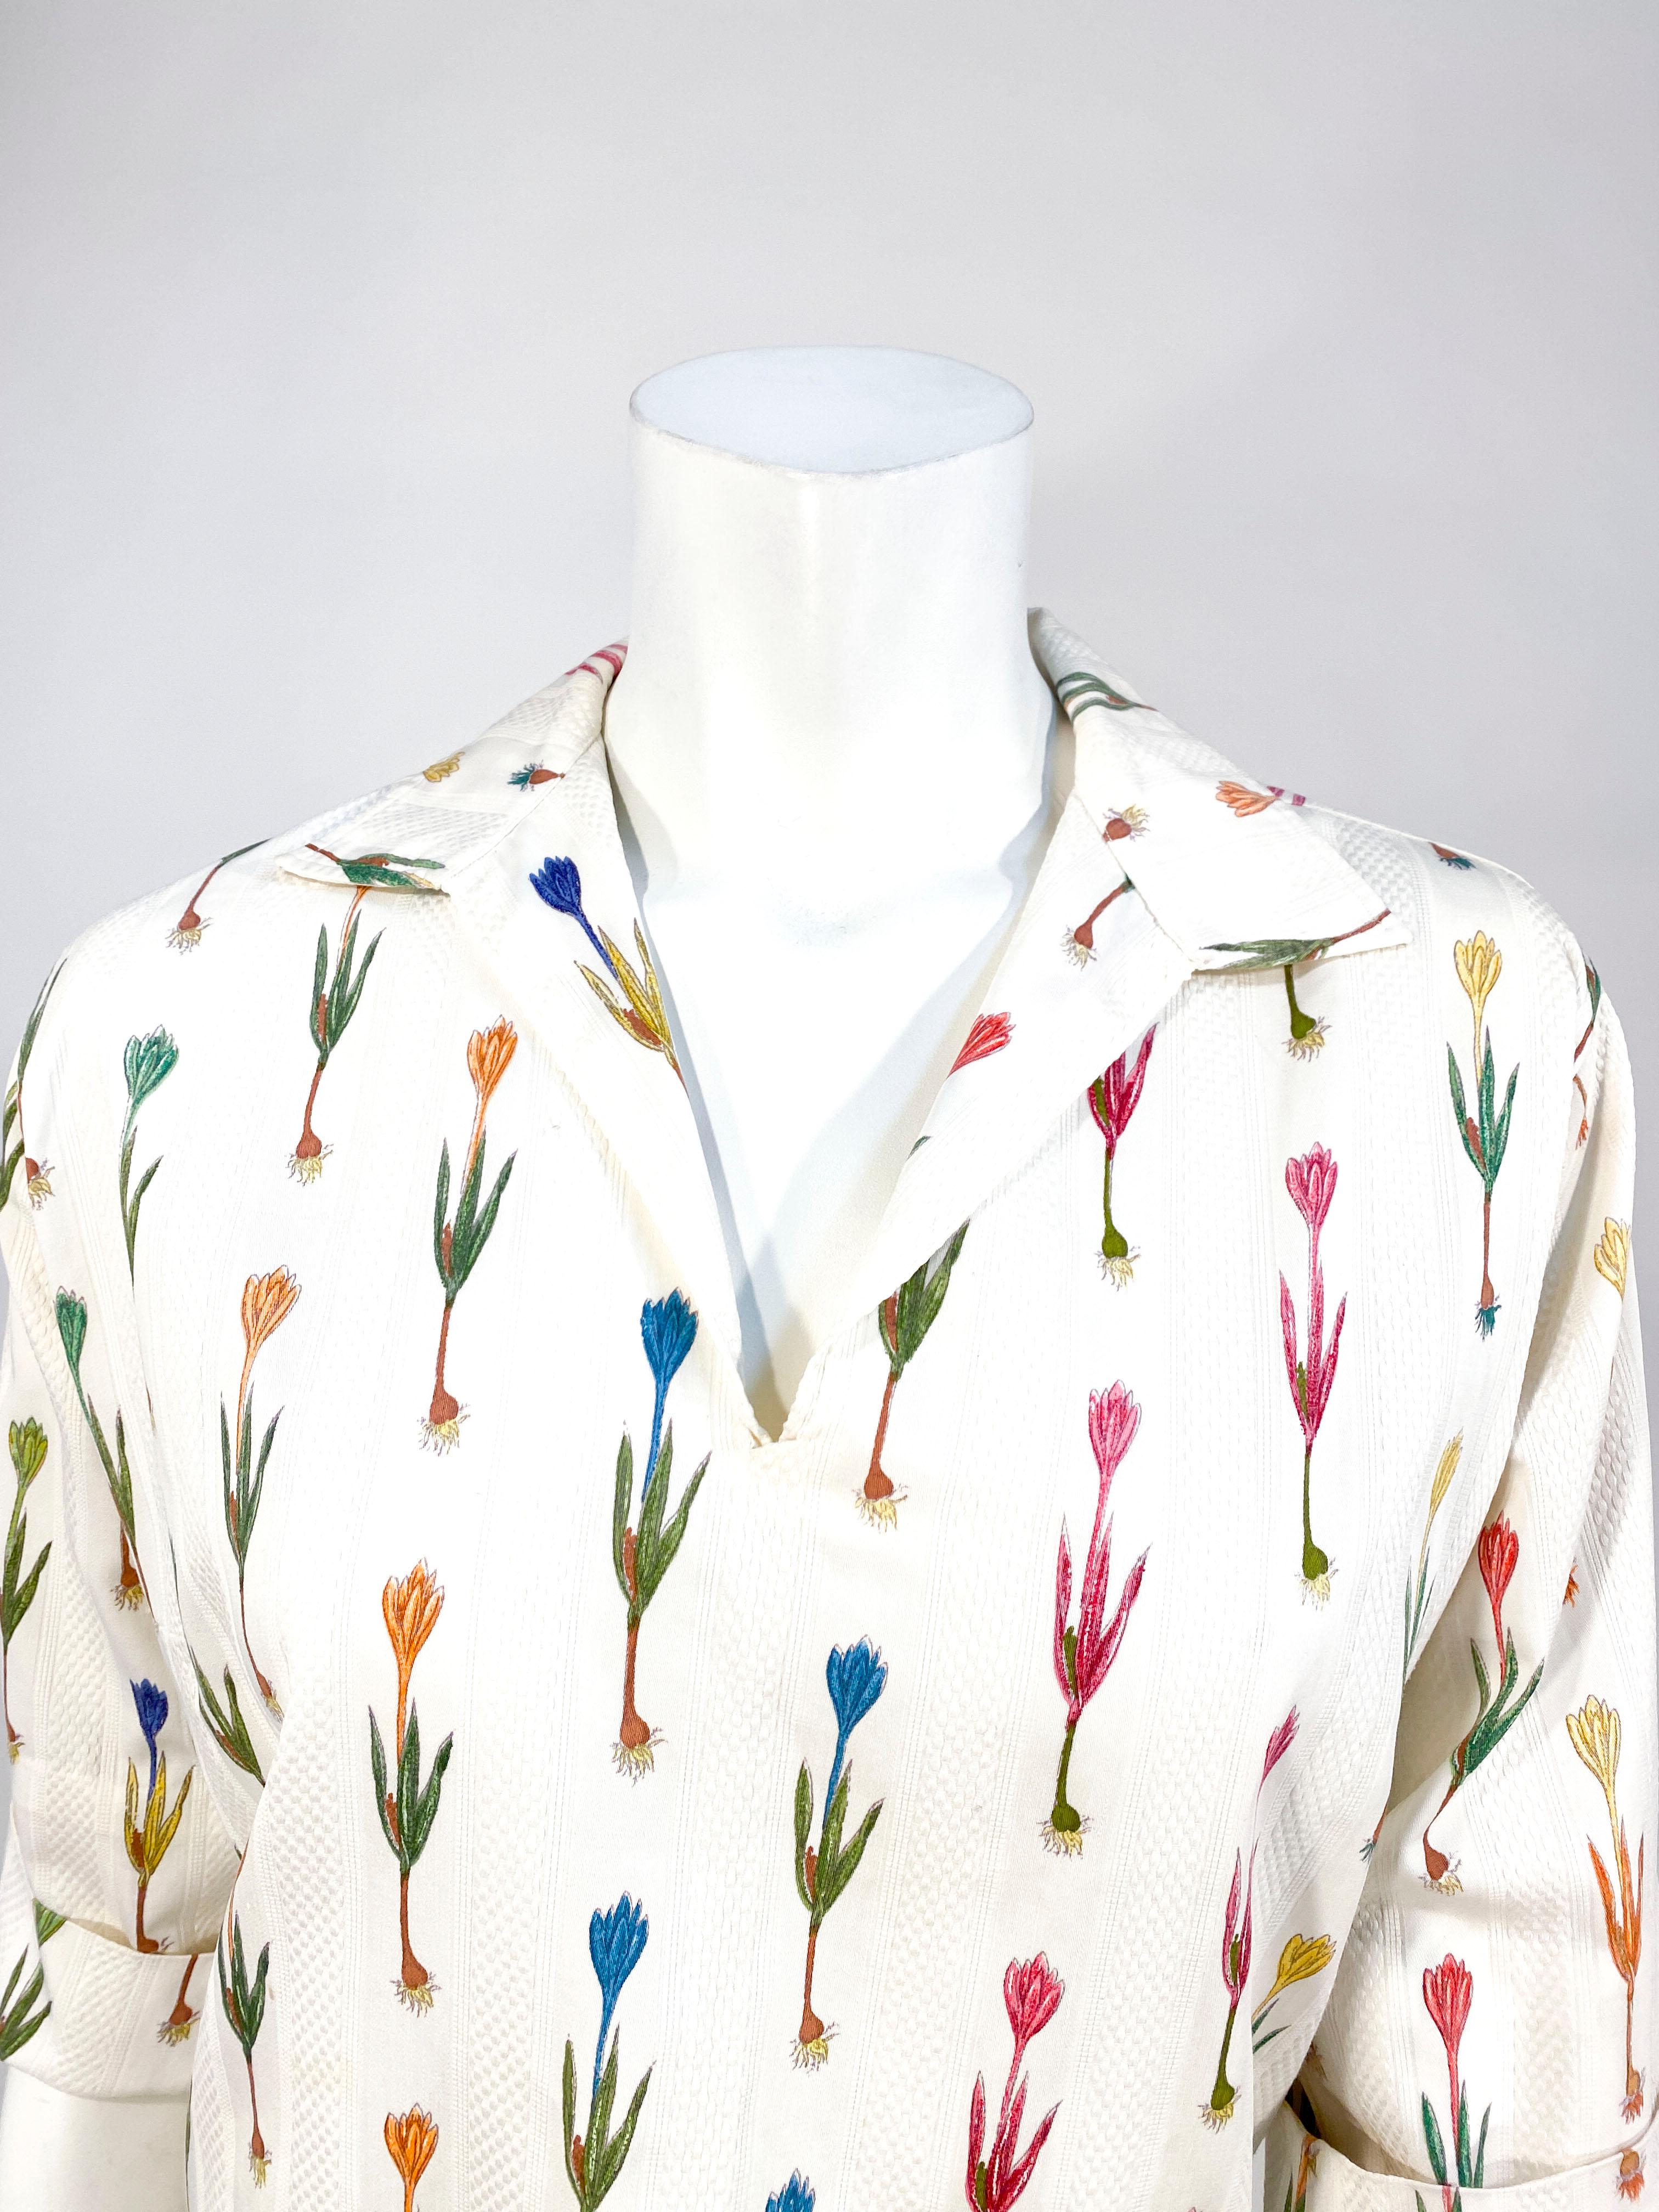 Late 1950s to early 1960s I. Magnin off-white colored cotton pull over featuring a hand printed multi-colored floral motive with stripes of pique texture. The novelty printed fabric origins from Italy. The sleeves are three-fourths length, fold up